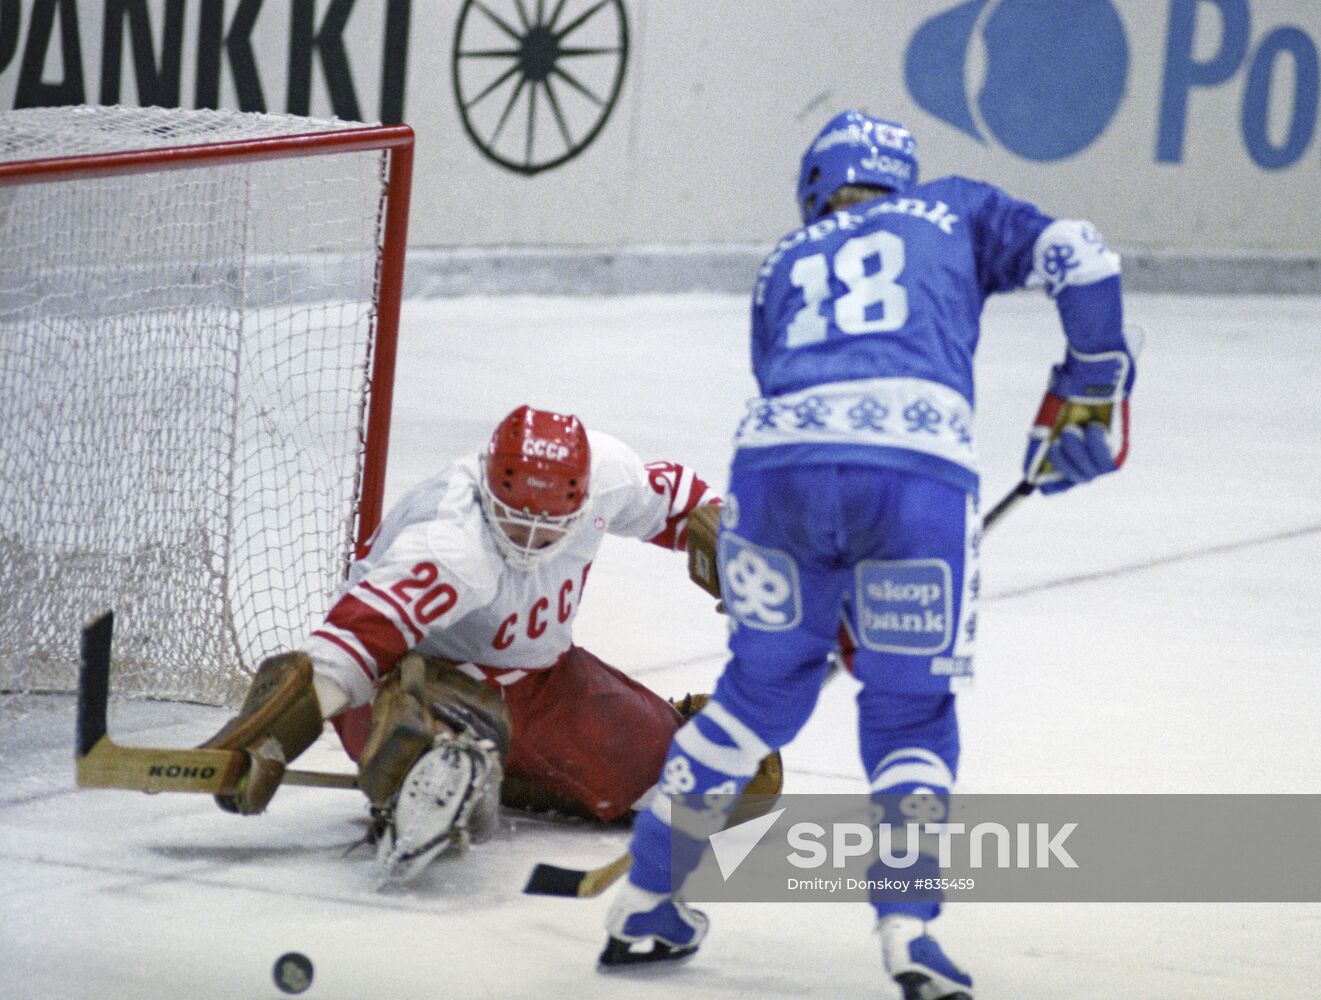 Hockey match between USSR and Finland teams